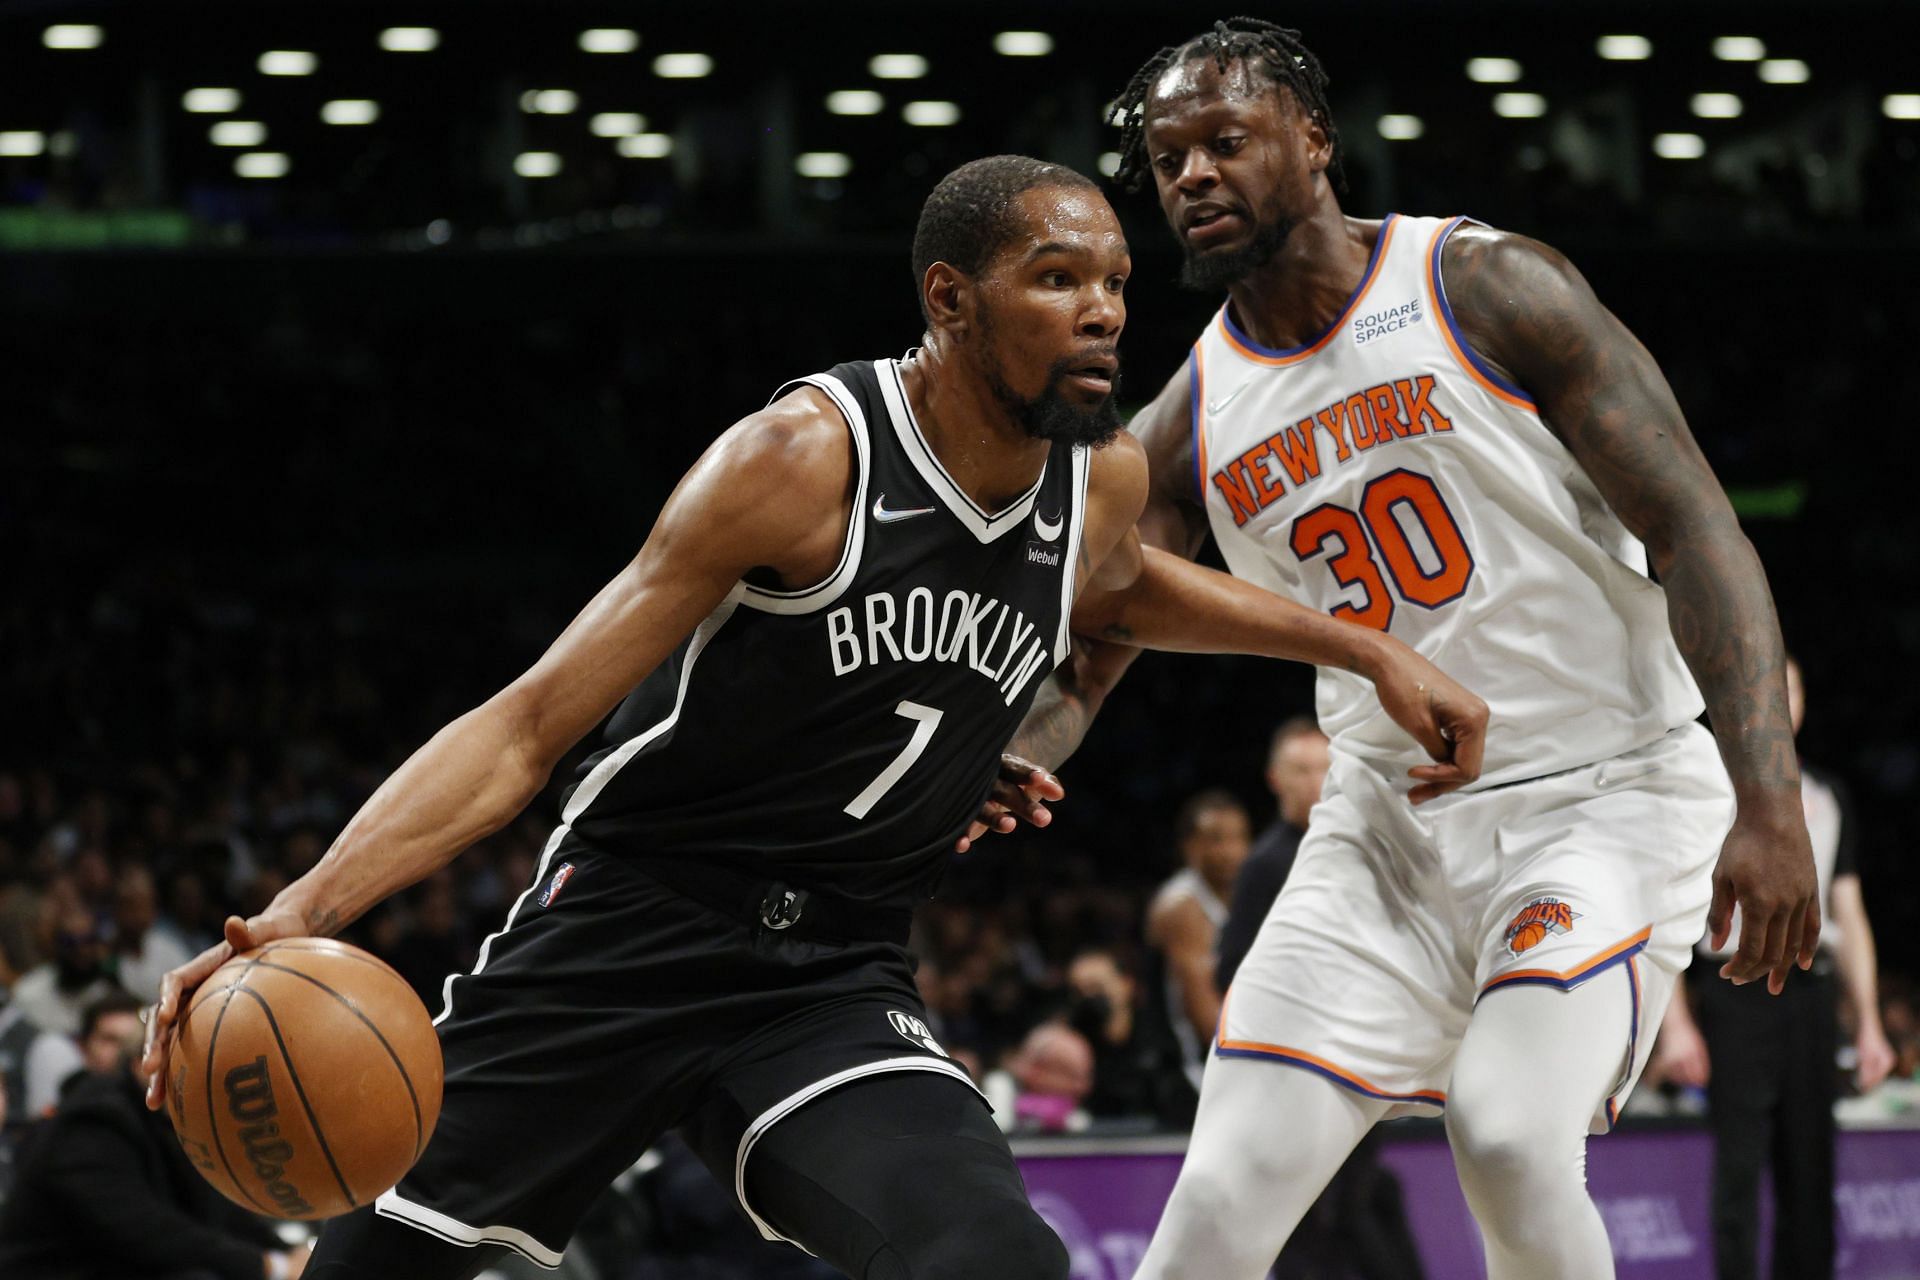 Kevin Durant had a 53-point barrage against the Knicks in a win Sunday.